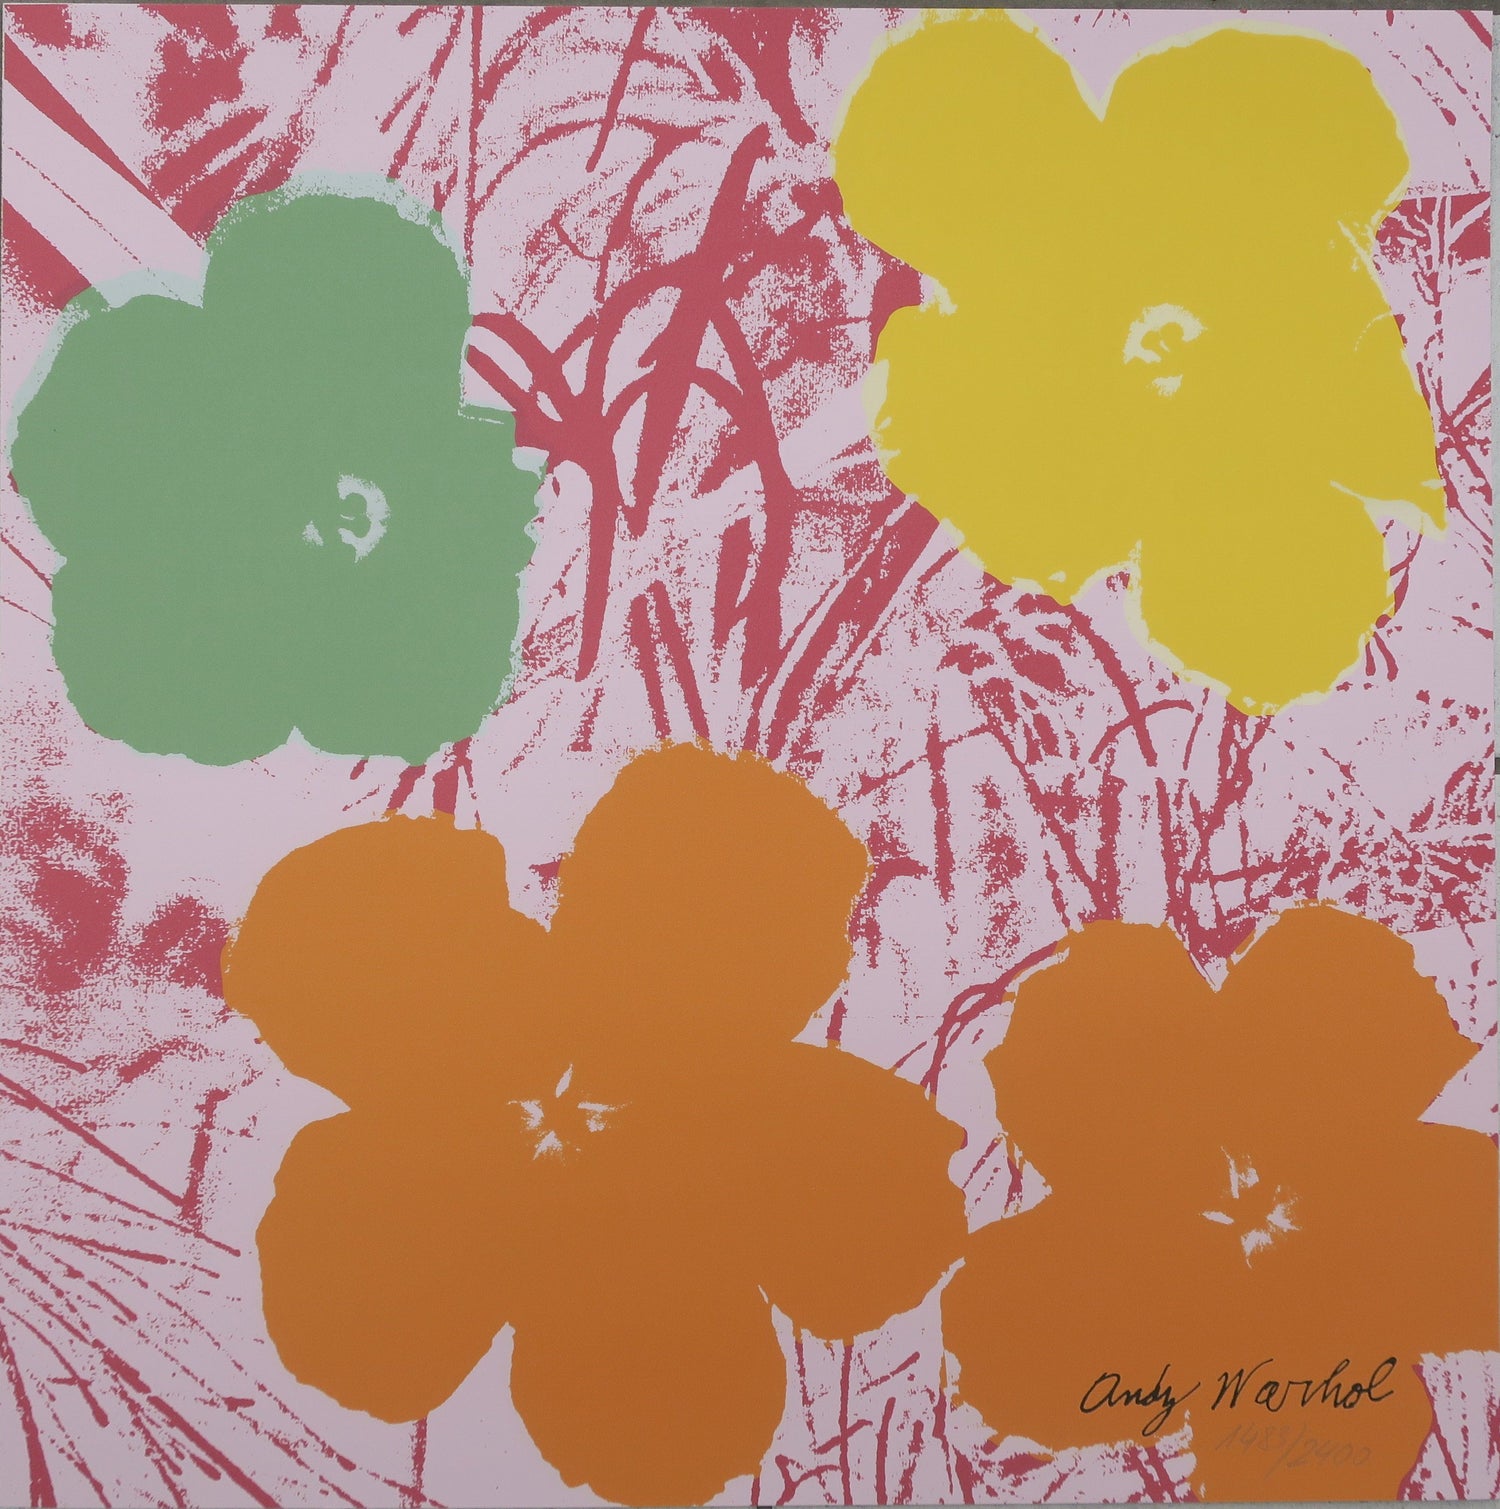 Andy Warhol Flowers Lithograph